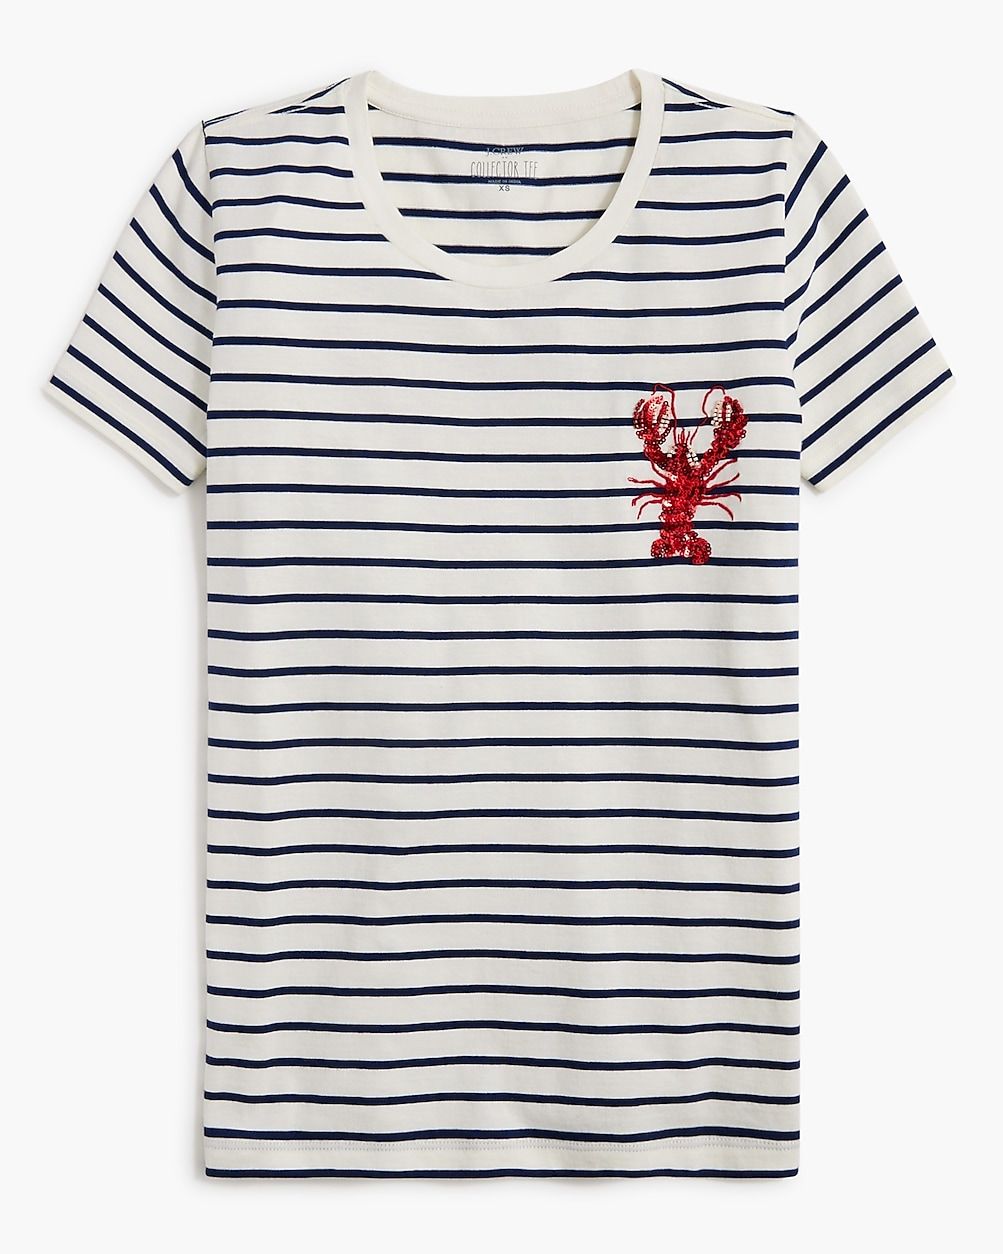 Lobster striped graphic tee | J.Crew Factory